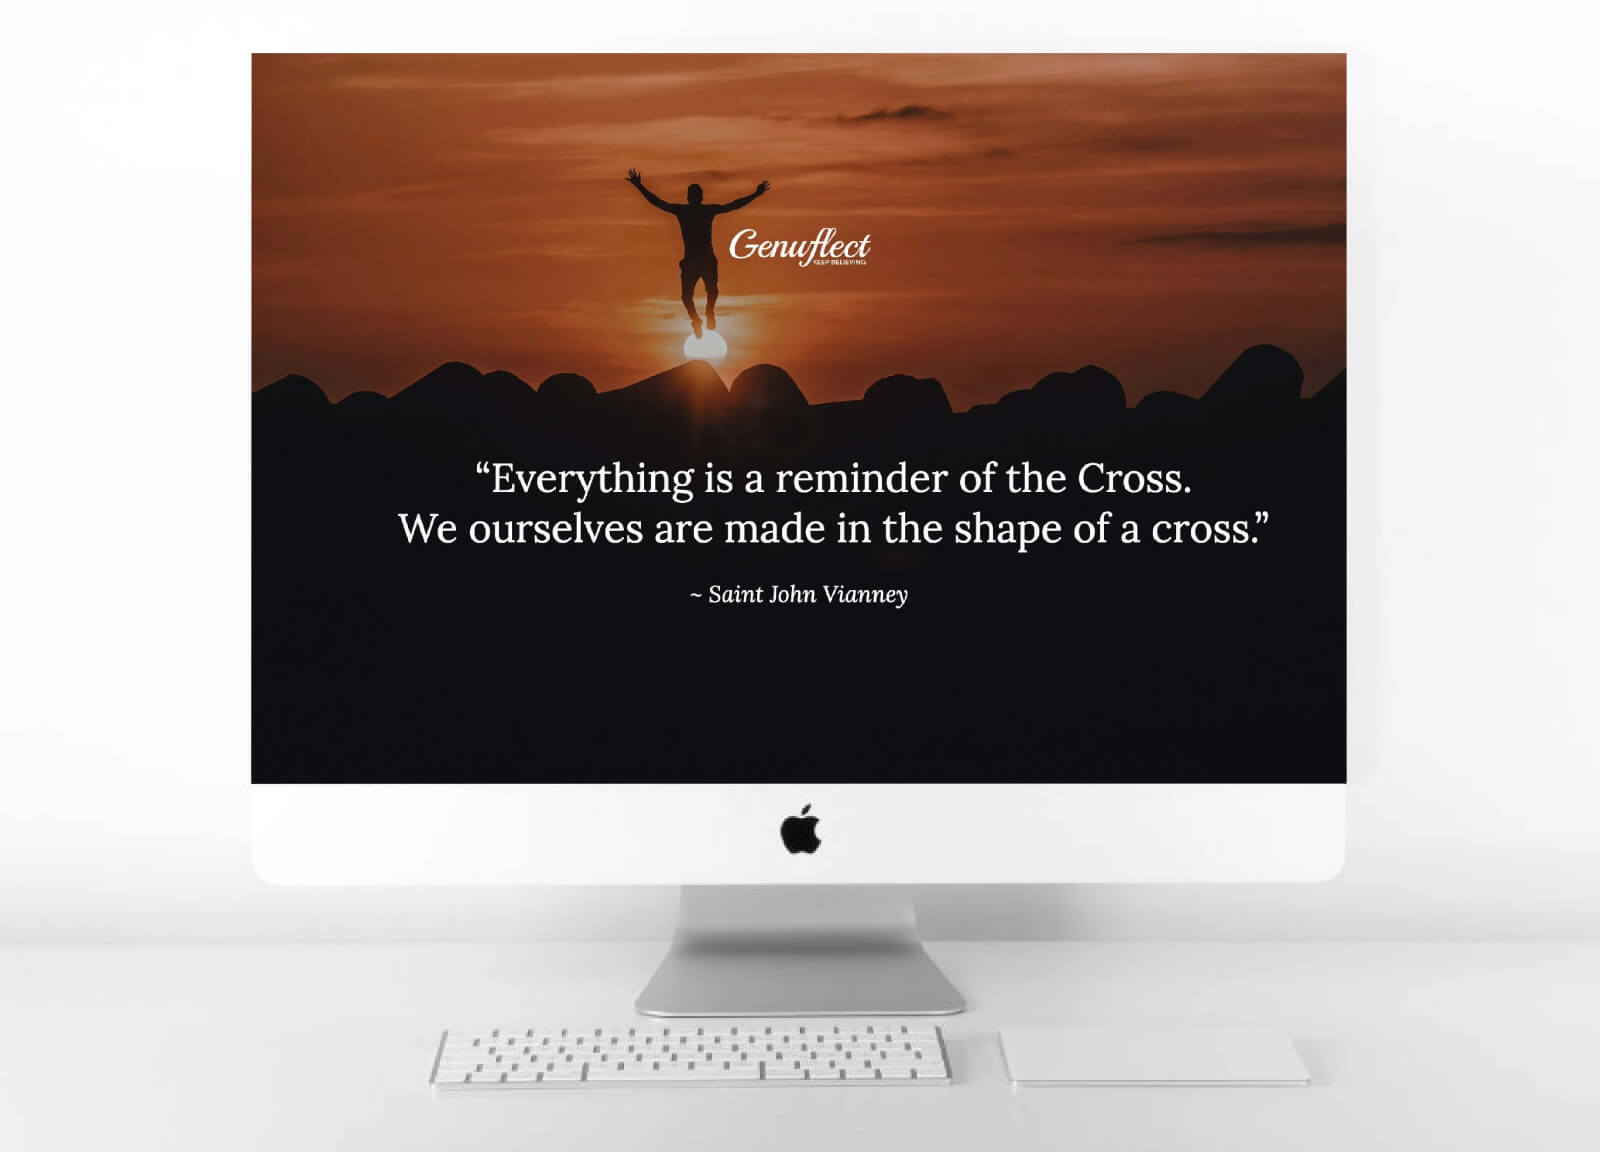 Genuflect Computer background image of a Silhouette of a man with arms outstretched to form a cross with the sun setting in the background